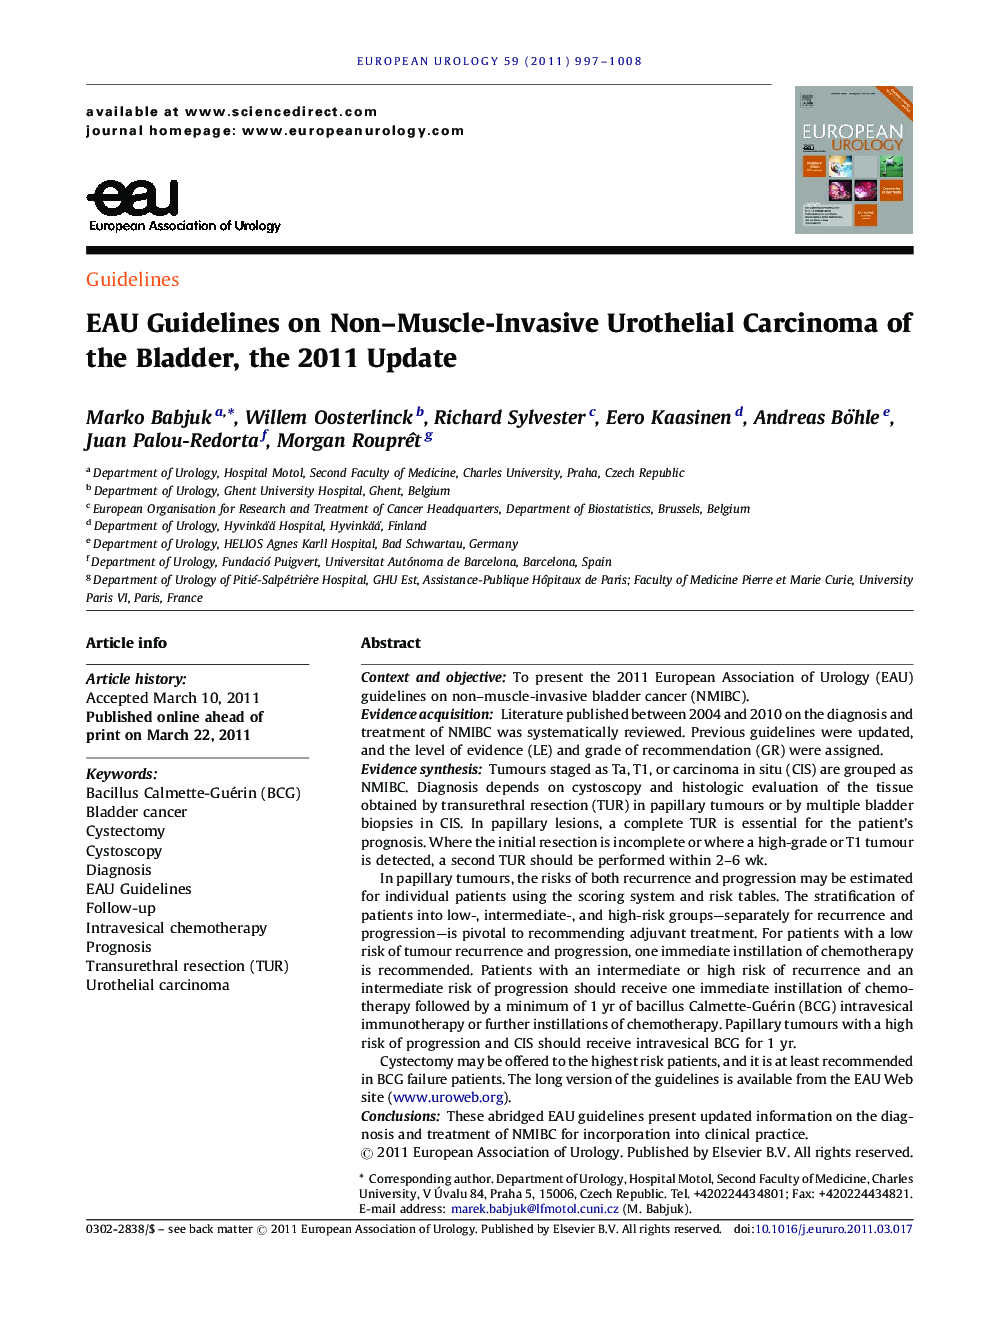 EAU Guidelines on Non–Muscle-Invasive Urothelial Carcinoma of the Bladder, the 2011 Update